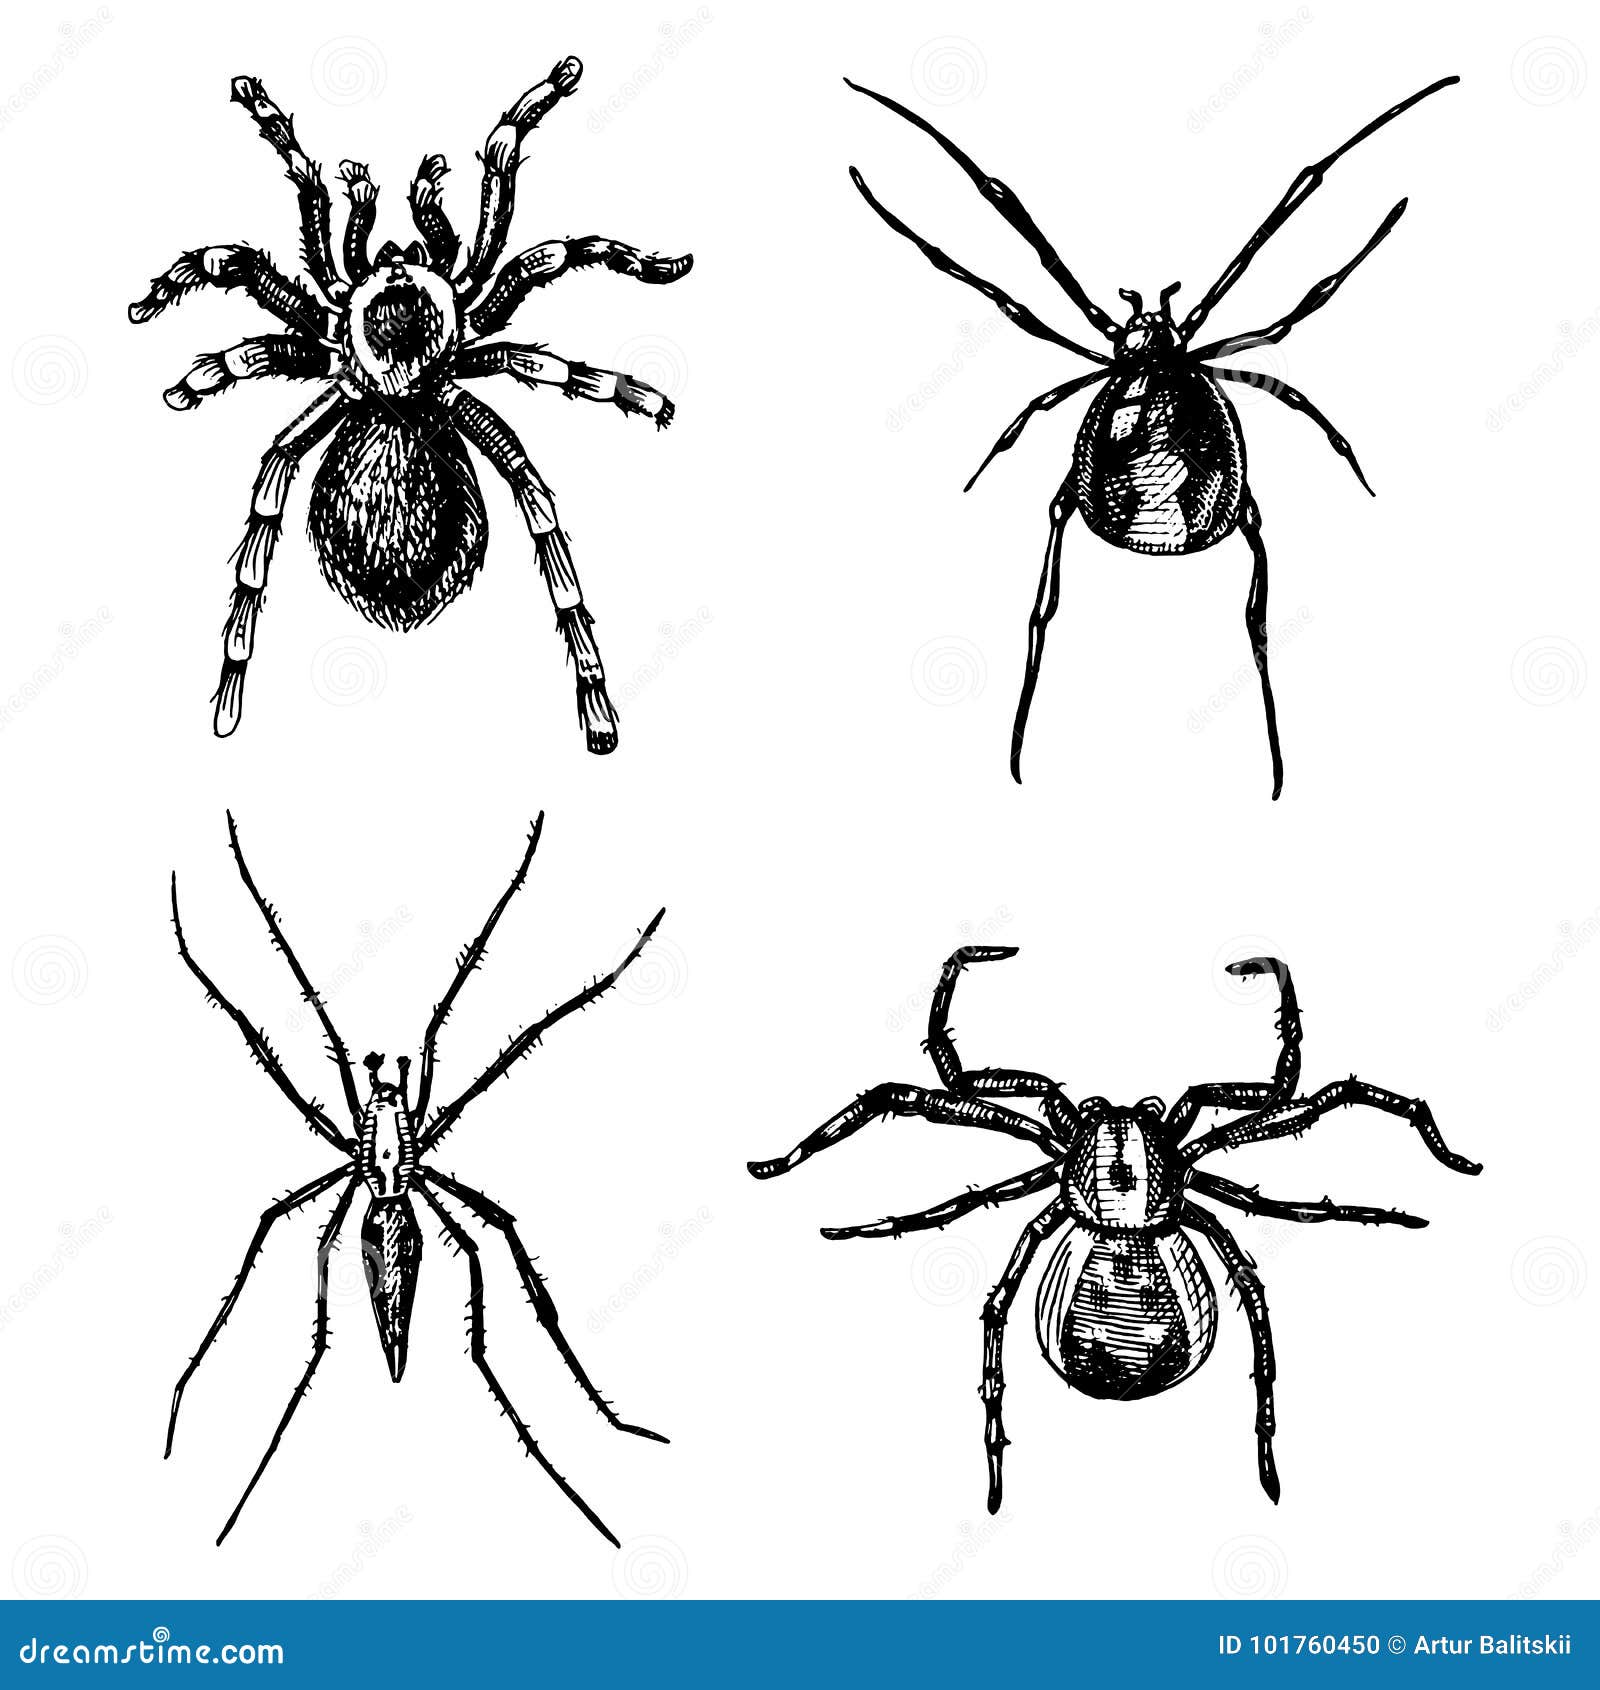 spider or arachnid species, most dangerous insects in the world, old vintage for halloween or phobia . hand drawn